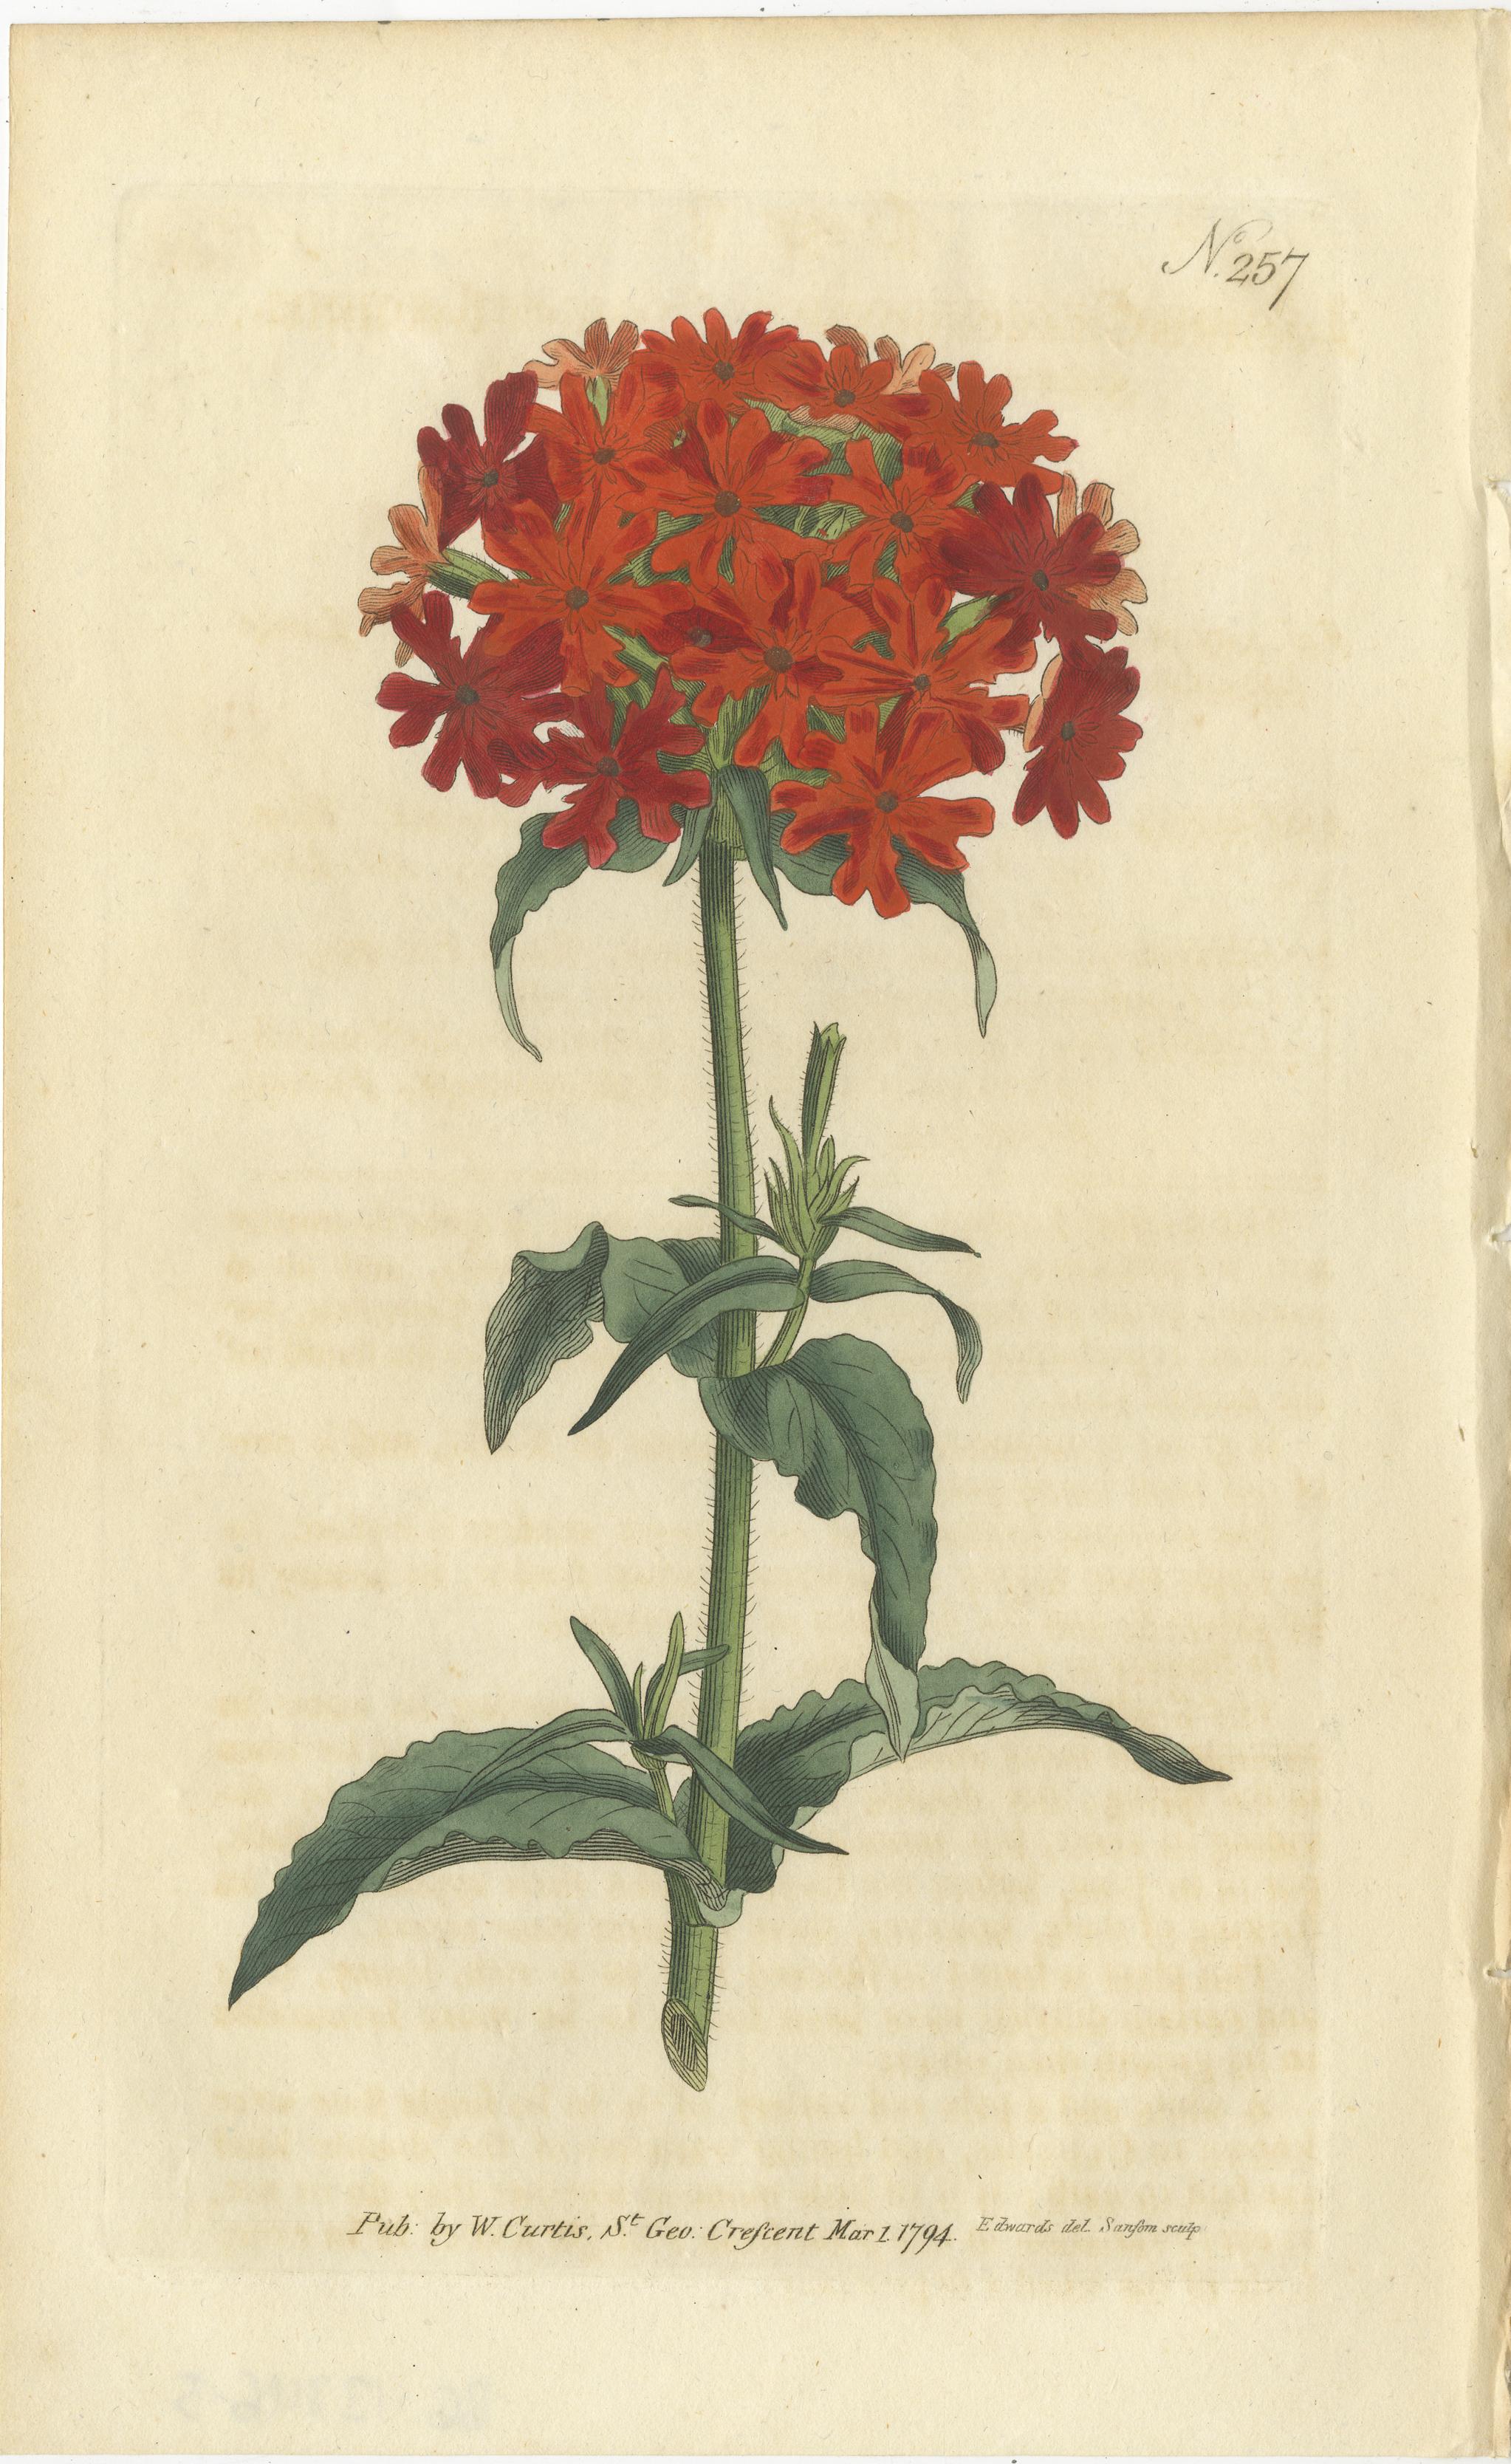 Set of 3 antique botany prints. It shows the Scarlet Lychnis, Catesby's Lily and Narrow-Leaved Cyrtanthus. These prints originate from 'The Botanical Magazine; or Flower-Garden Displayed (..)' by William Curtis. Published 1794. 

The Botanical